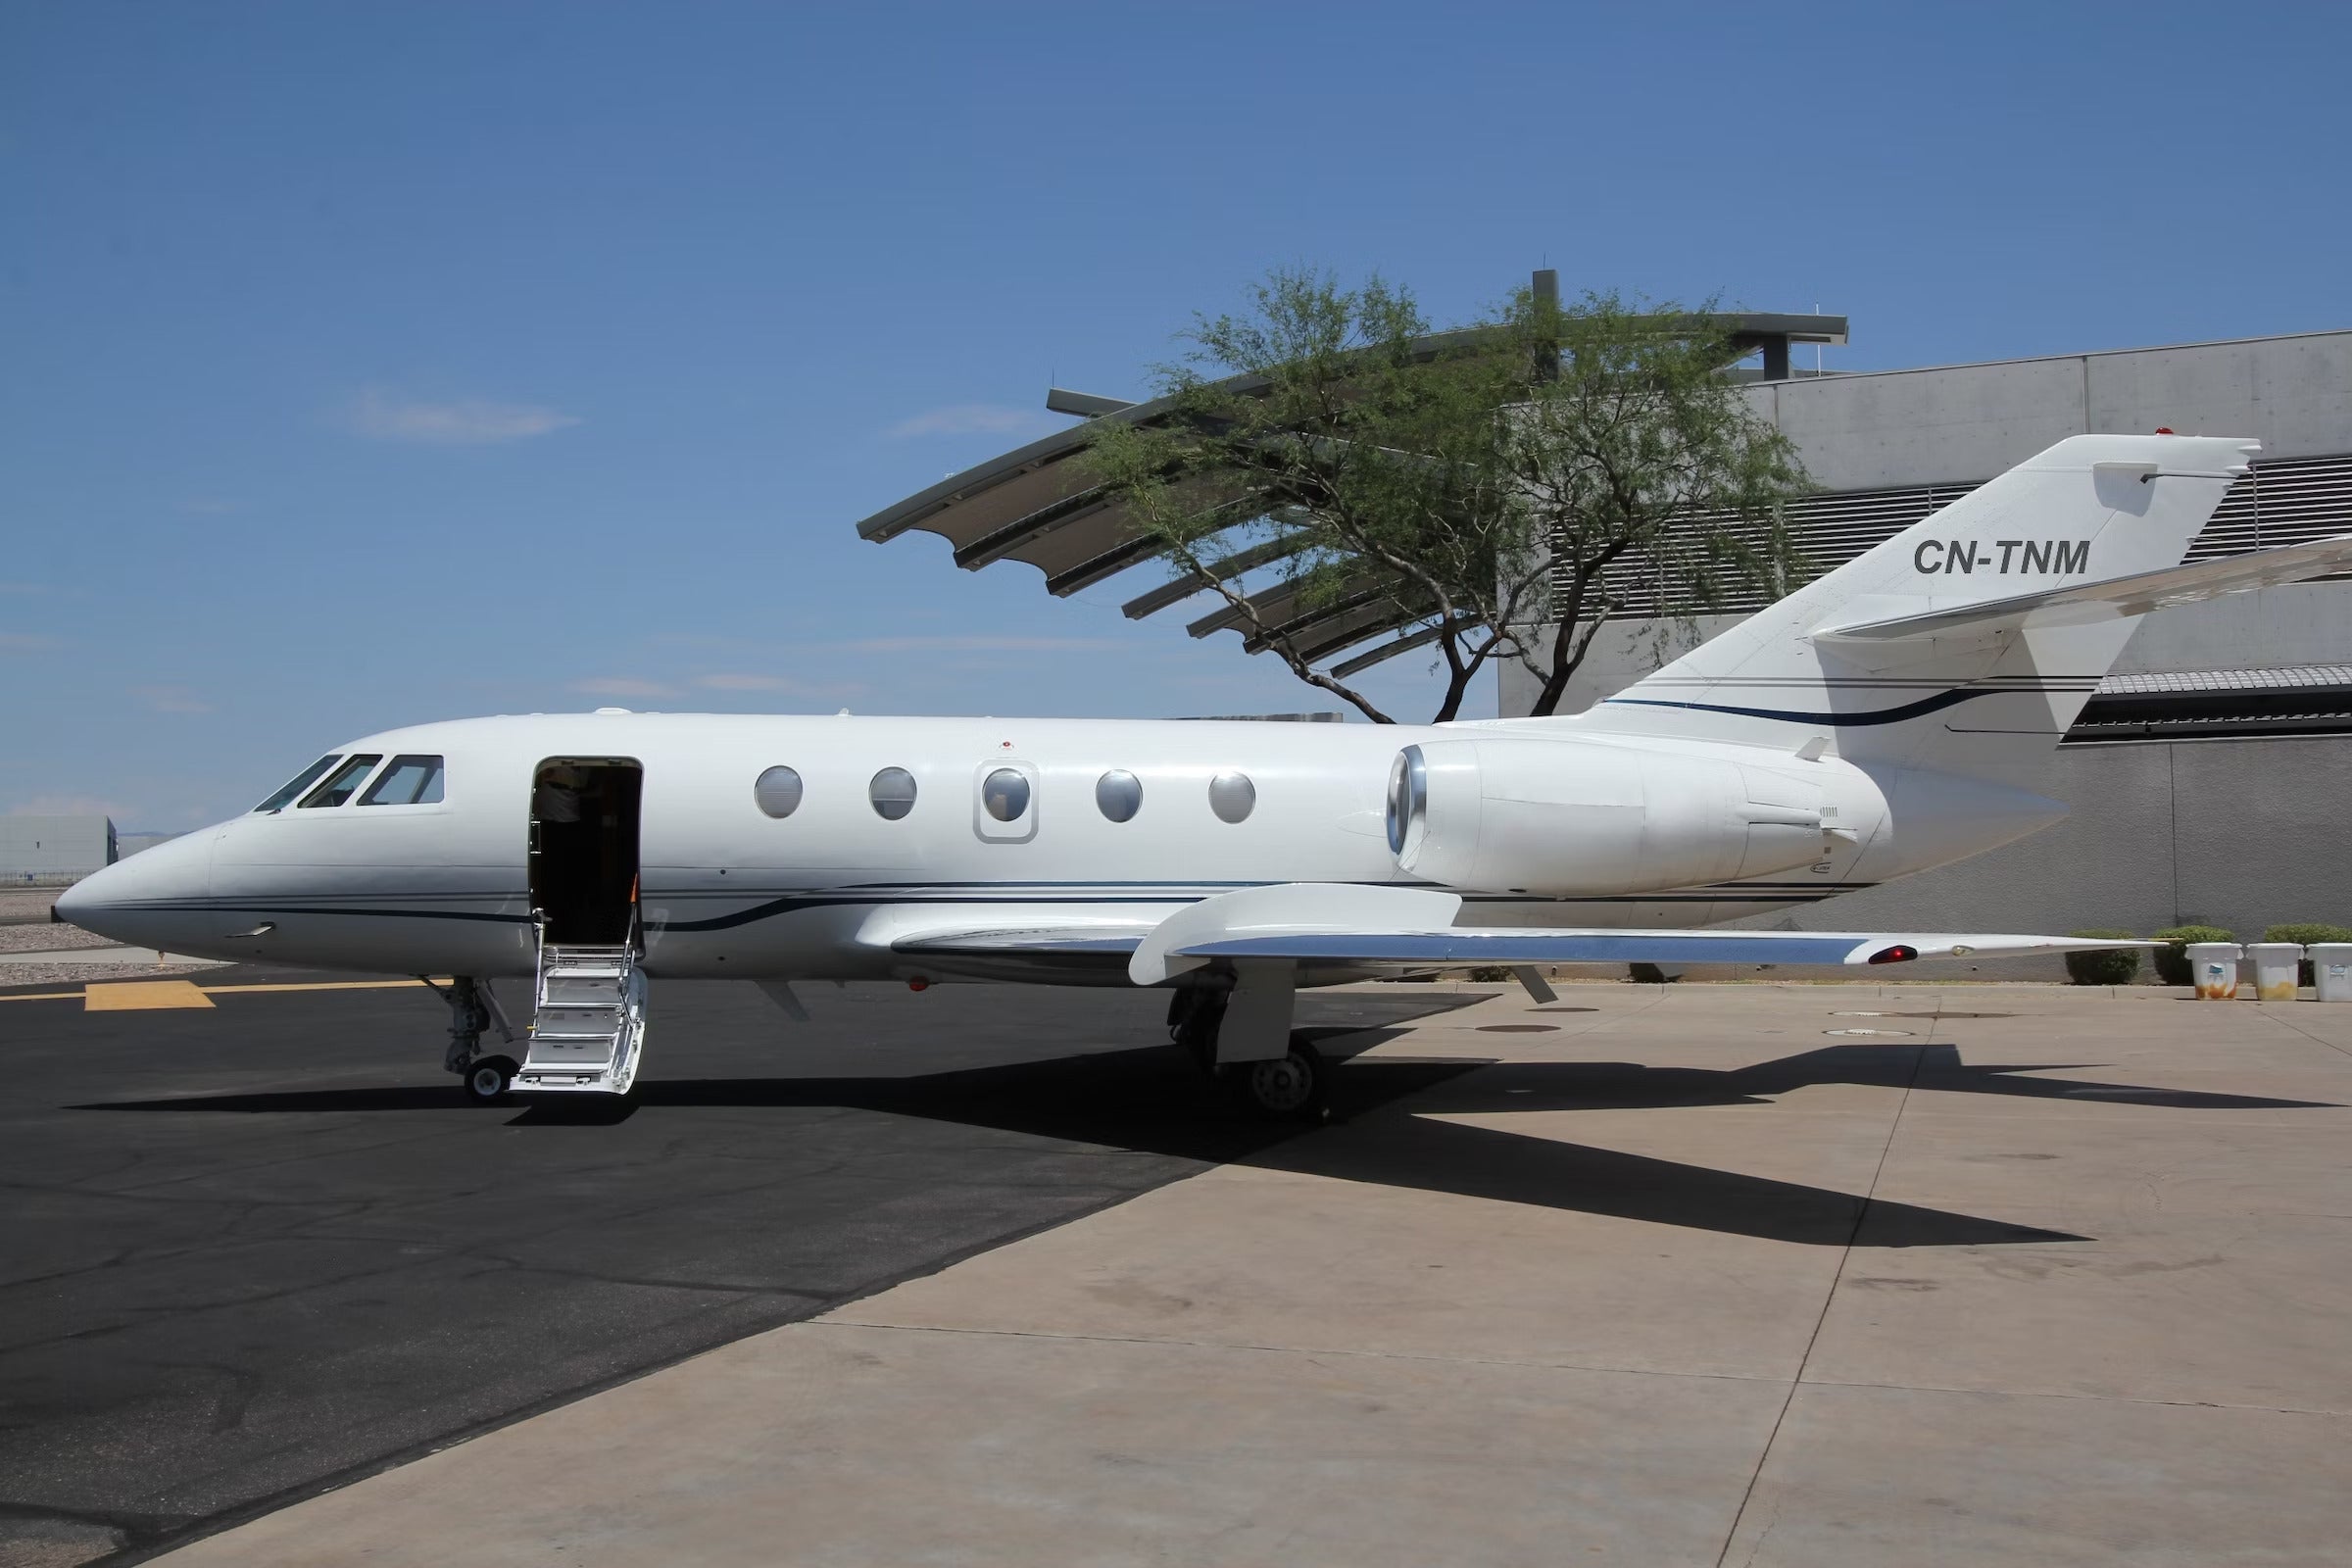 1973 Dassault Falcon 20F-5 Is a Fast, Stylish ‘Aircraft For Sale’ Top Pick